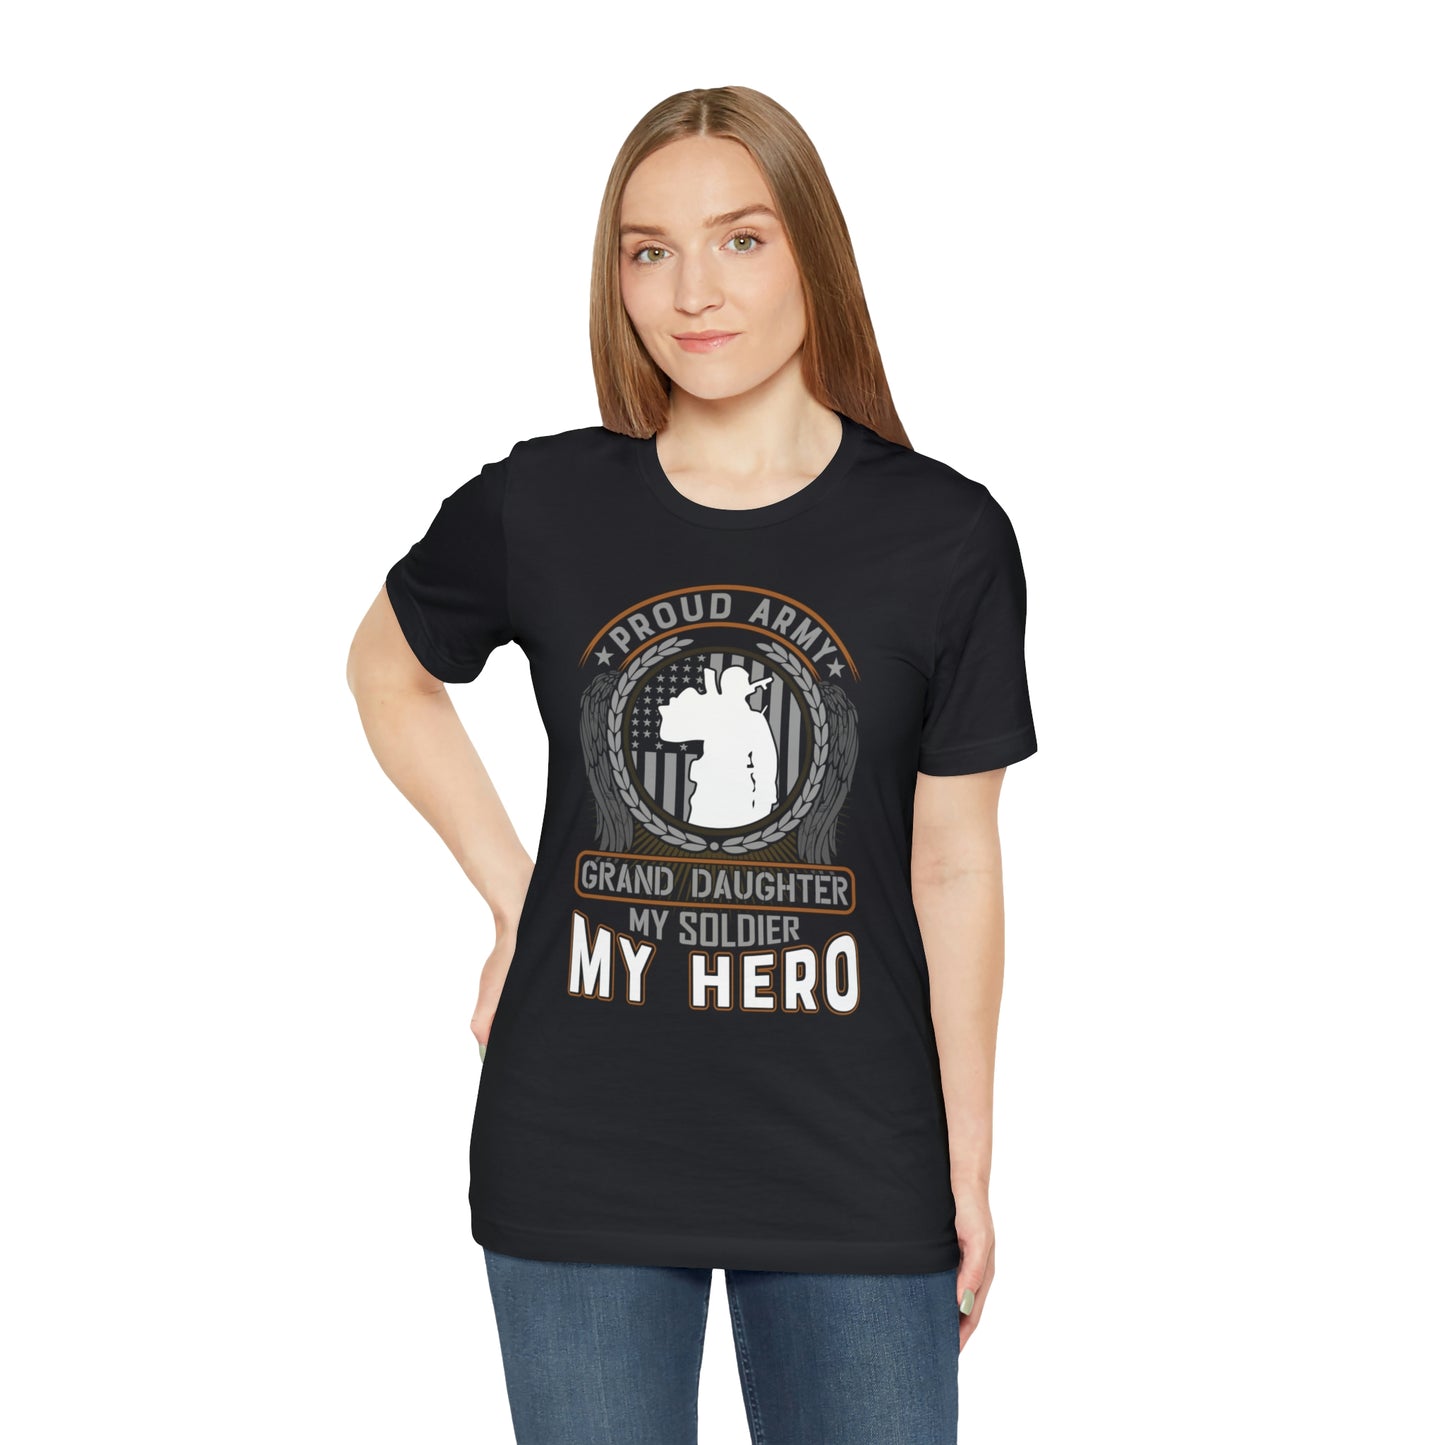 Proud Army Granddaughter My Soldier My Hero Short Sleeve T-shirt